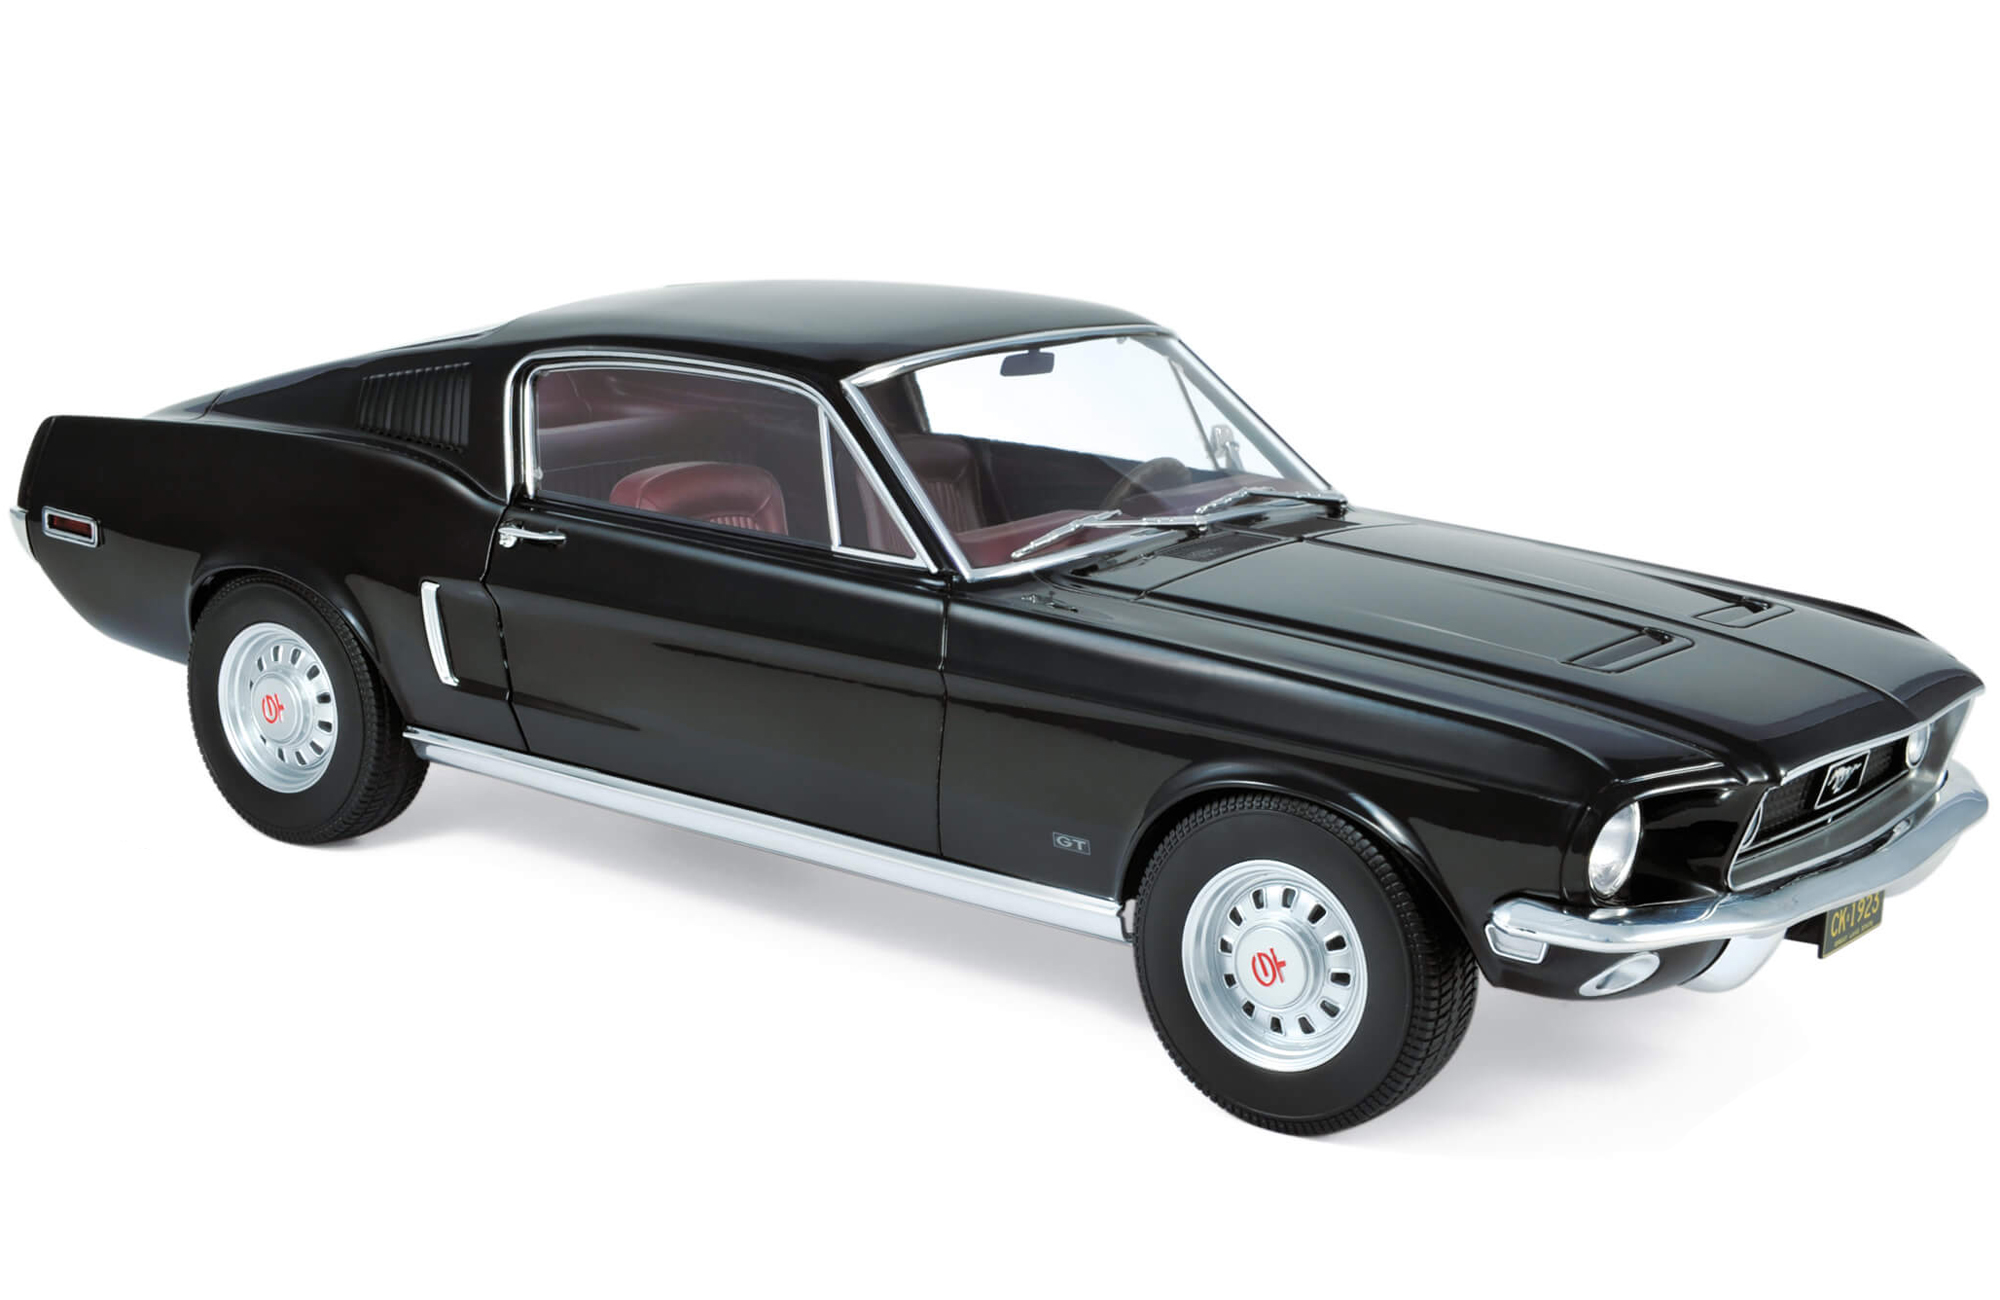 1968 Ford Mustang Fastback Black With Burgundy Interior 1/12 Diecast Model Car By Norev